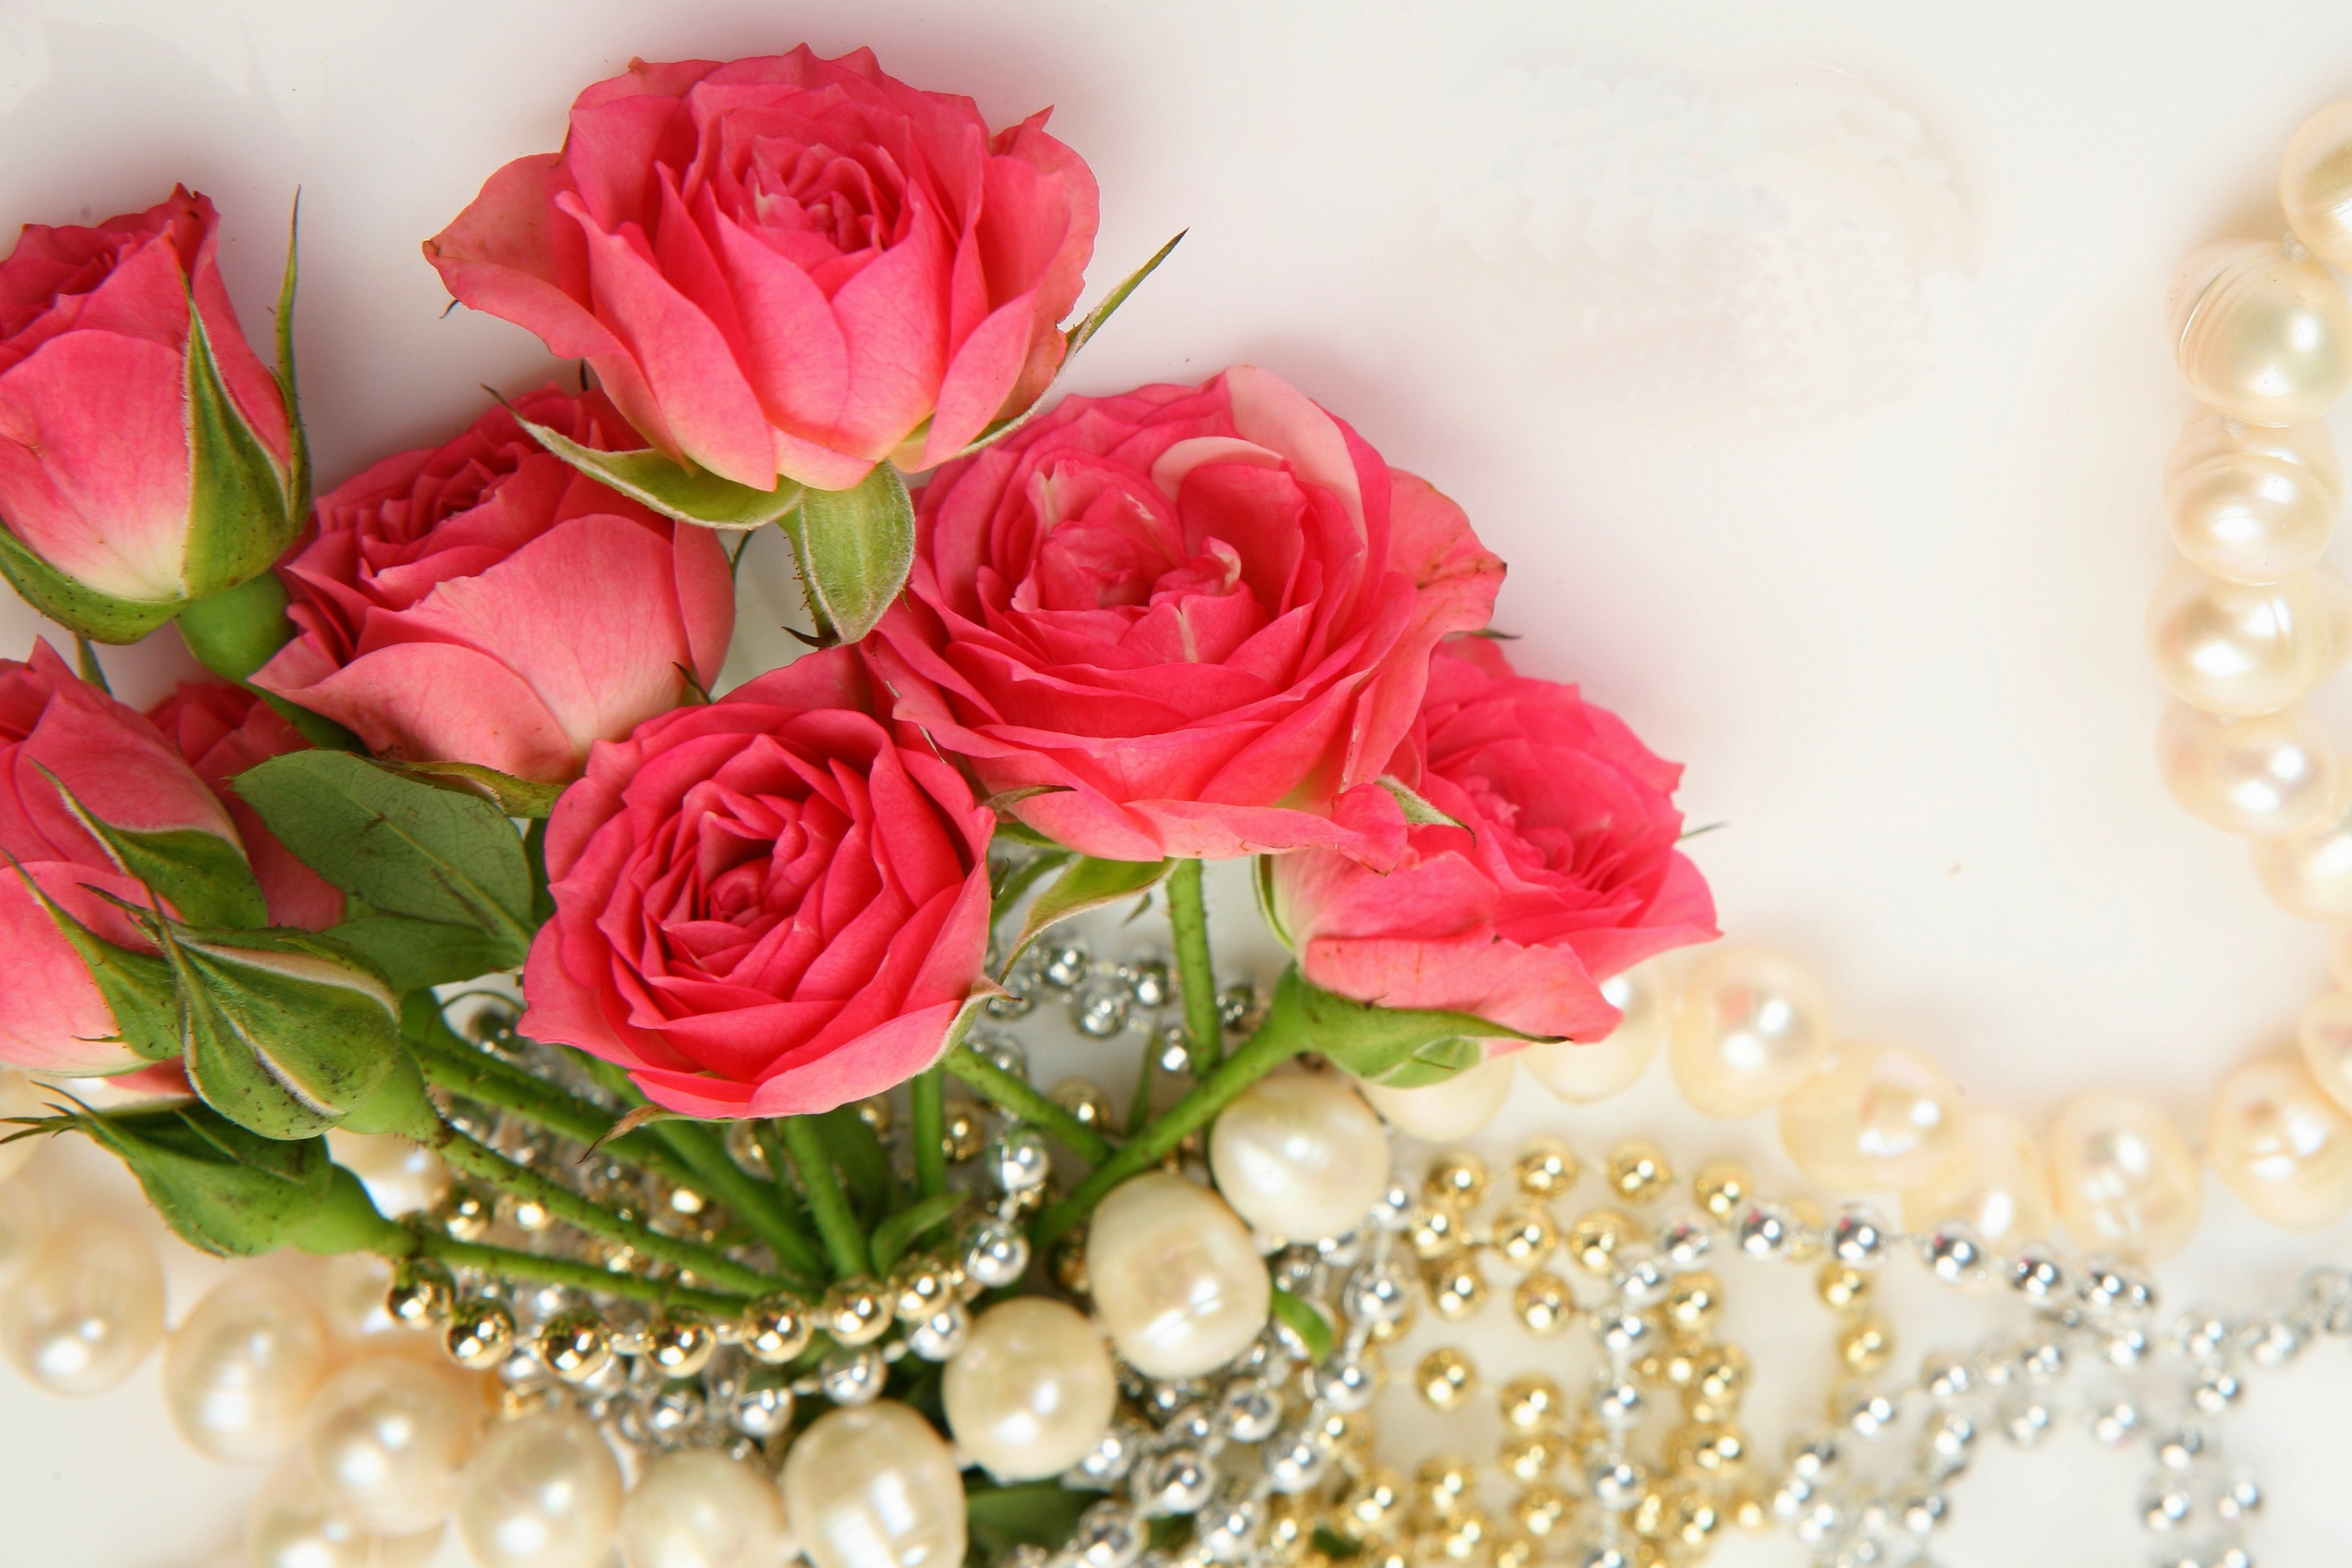 Necklace and Roses Bouquet wallpaper 2880x1920